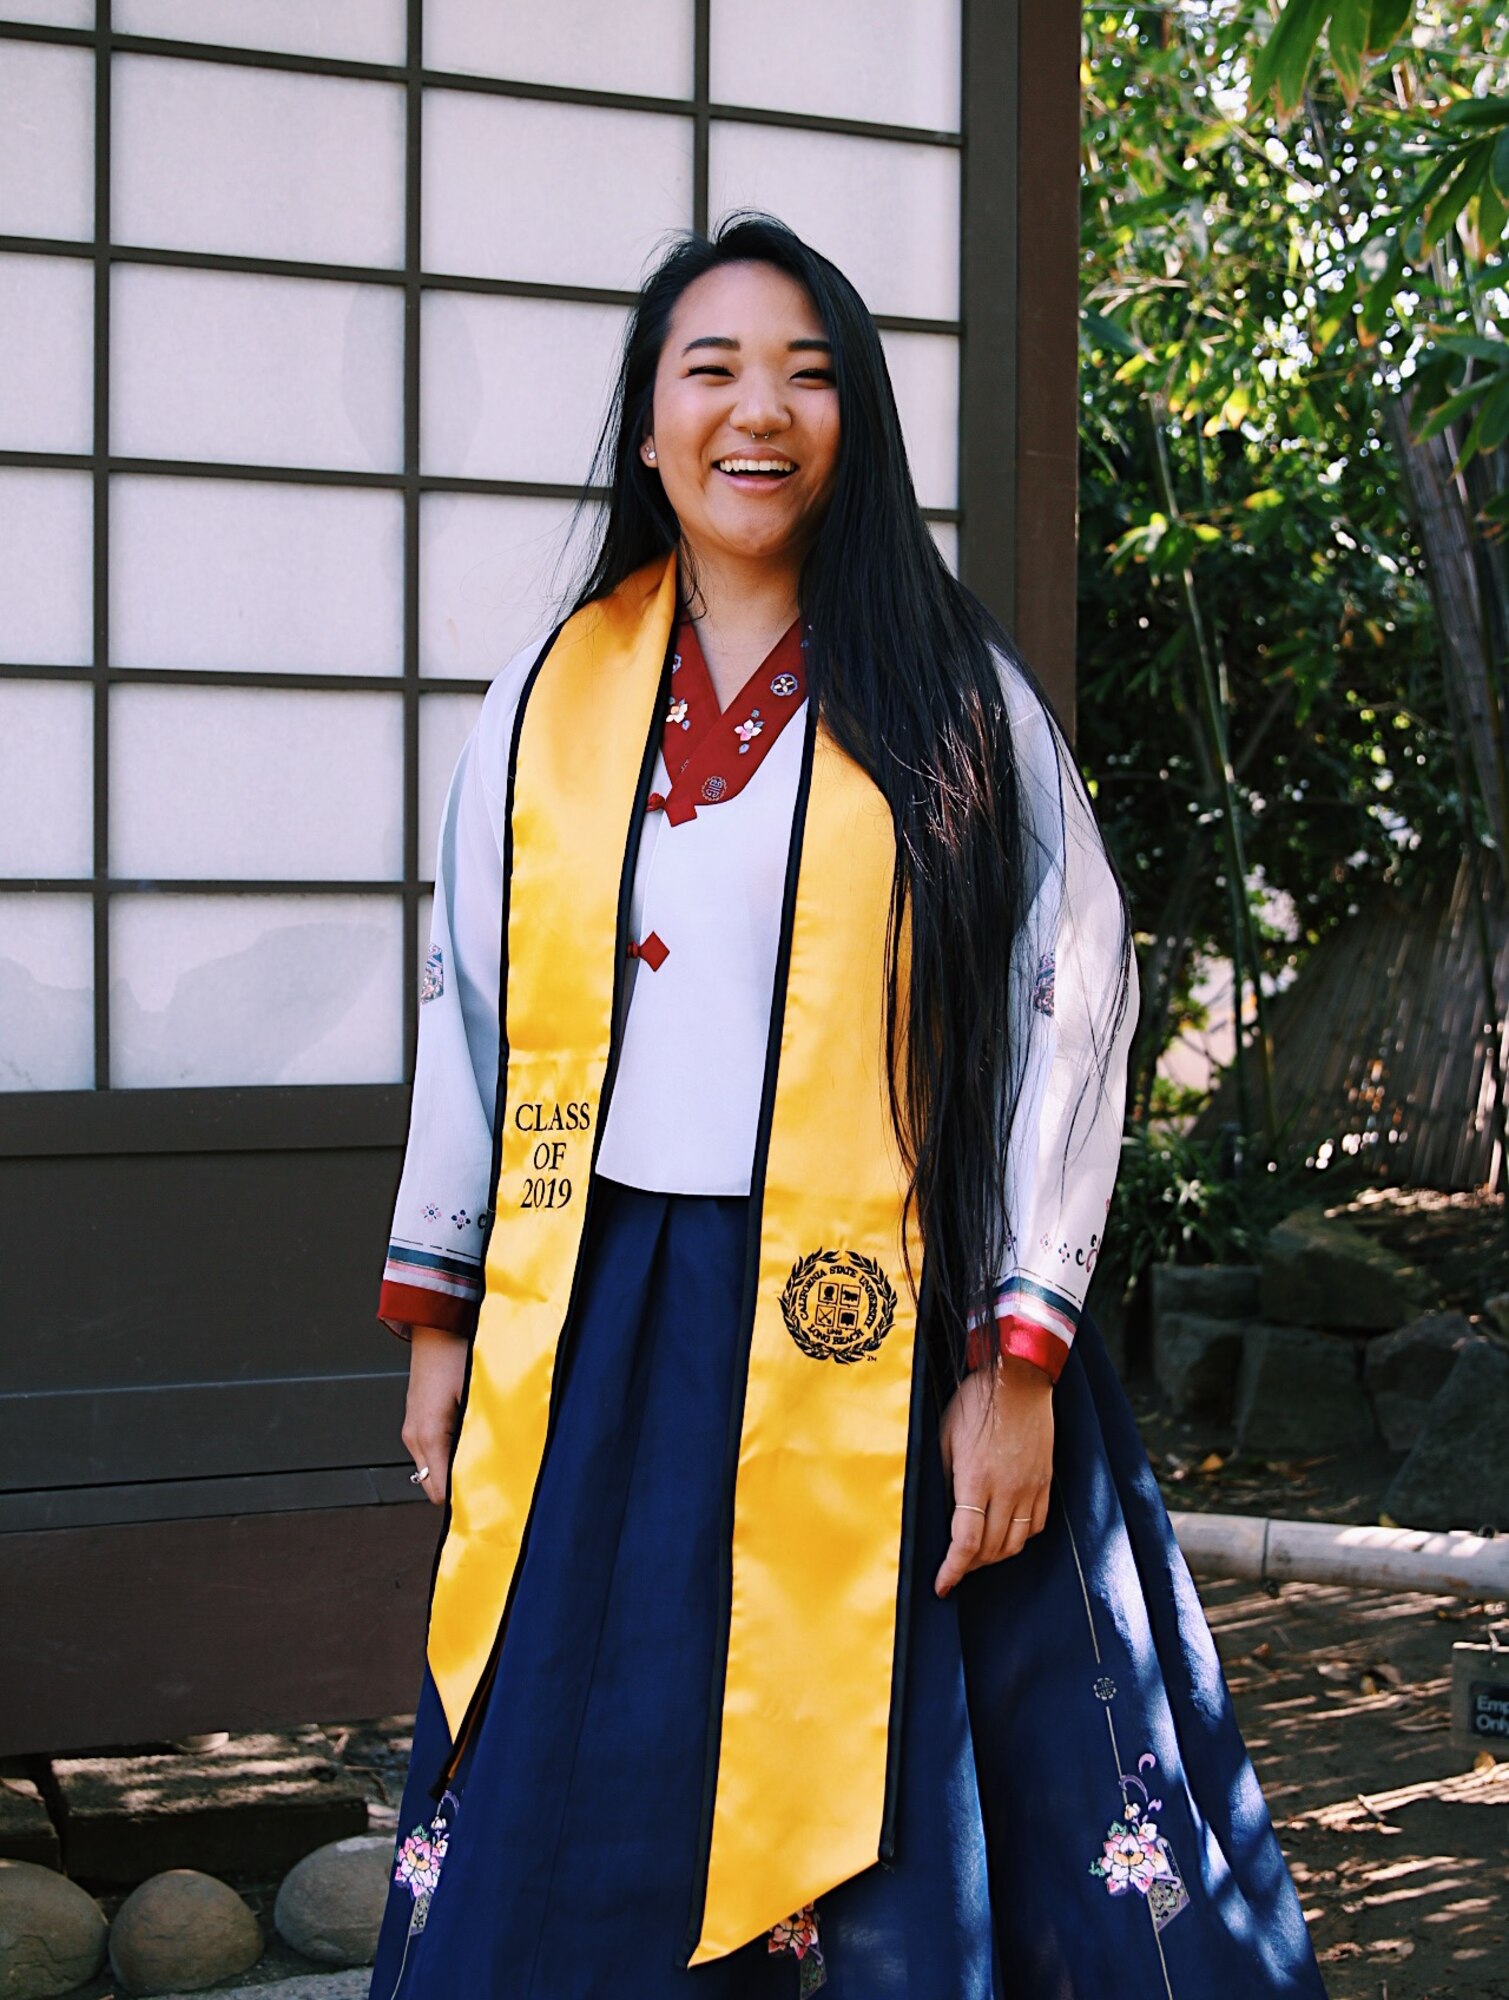 U.S. Air Force 2nd Lt. Michelle Chang, 92nd Air Refueling Wing public affairs command information chief, poses for a graduation photo, at California State University Long Beach, 10 May, 2019. Chang is wearing a hanbok, a traditional Korean dress, worn to represent her culture and heritage. (Courtesy photo)